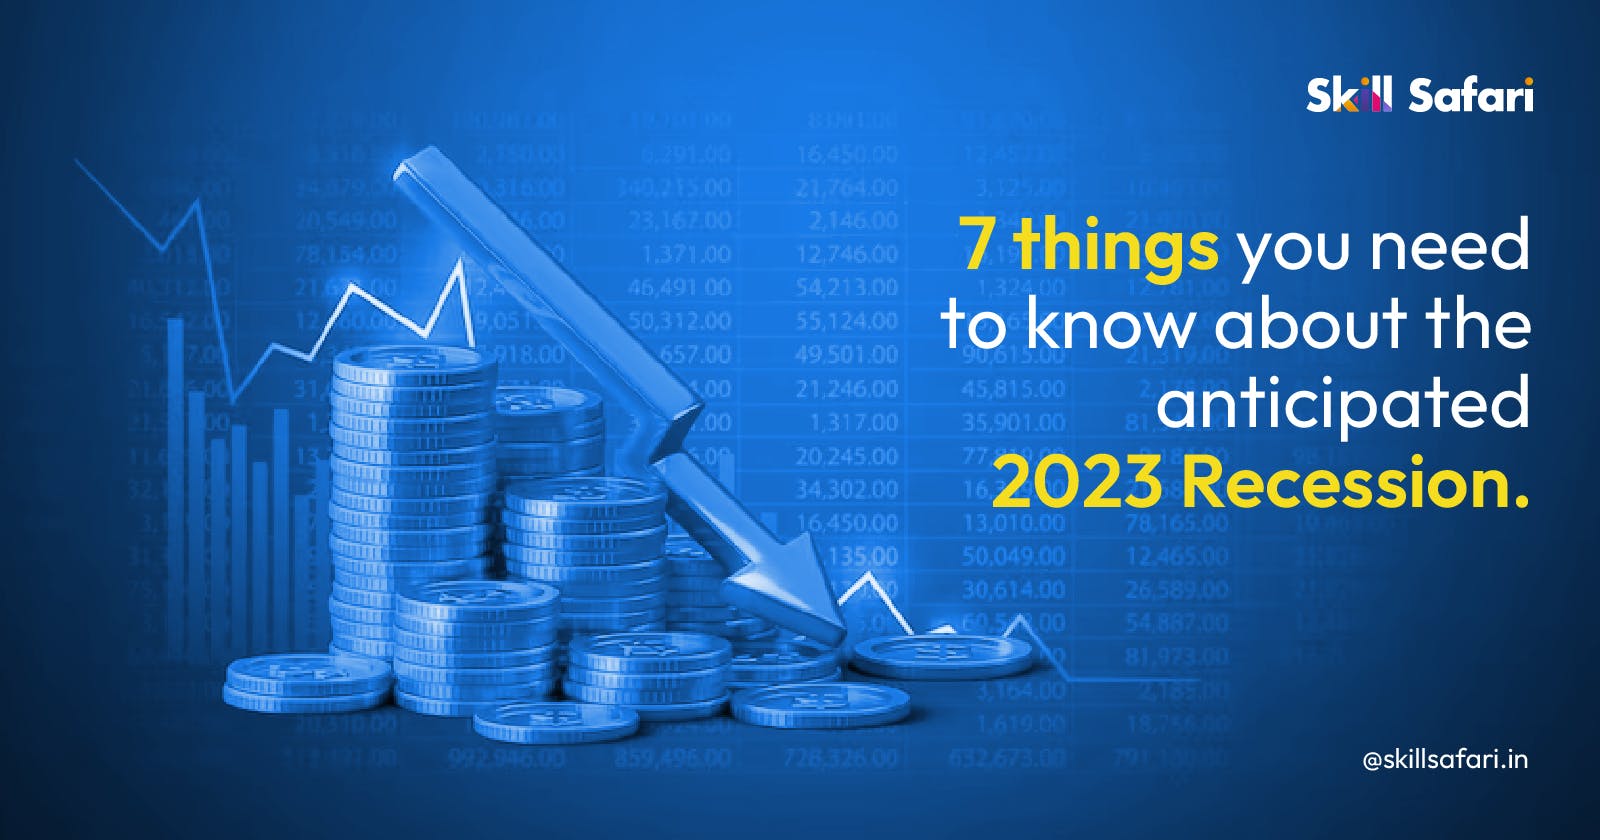 7 things you need to know about the anticipated 2023 recession